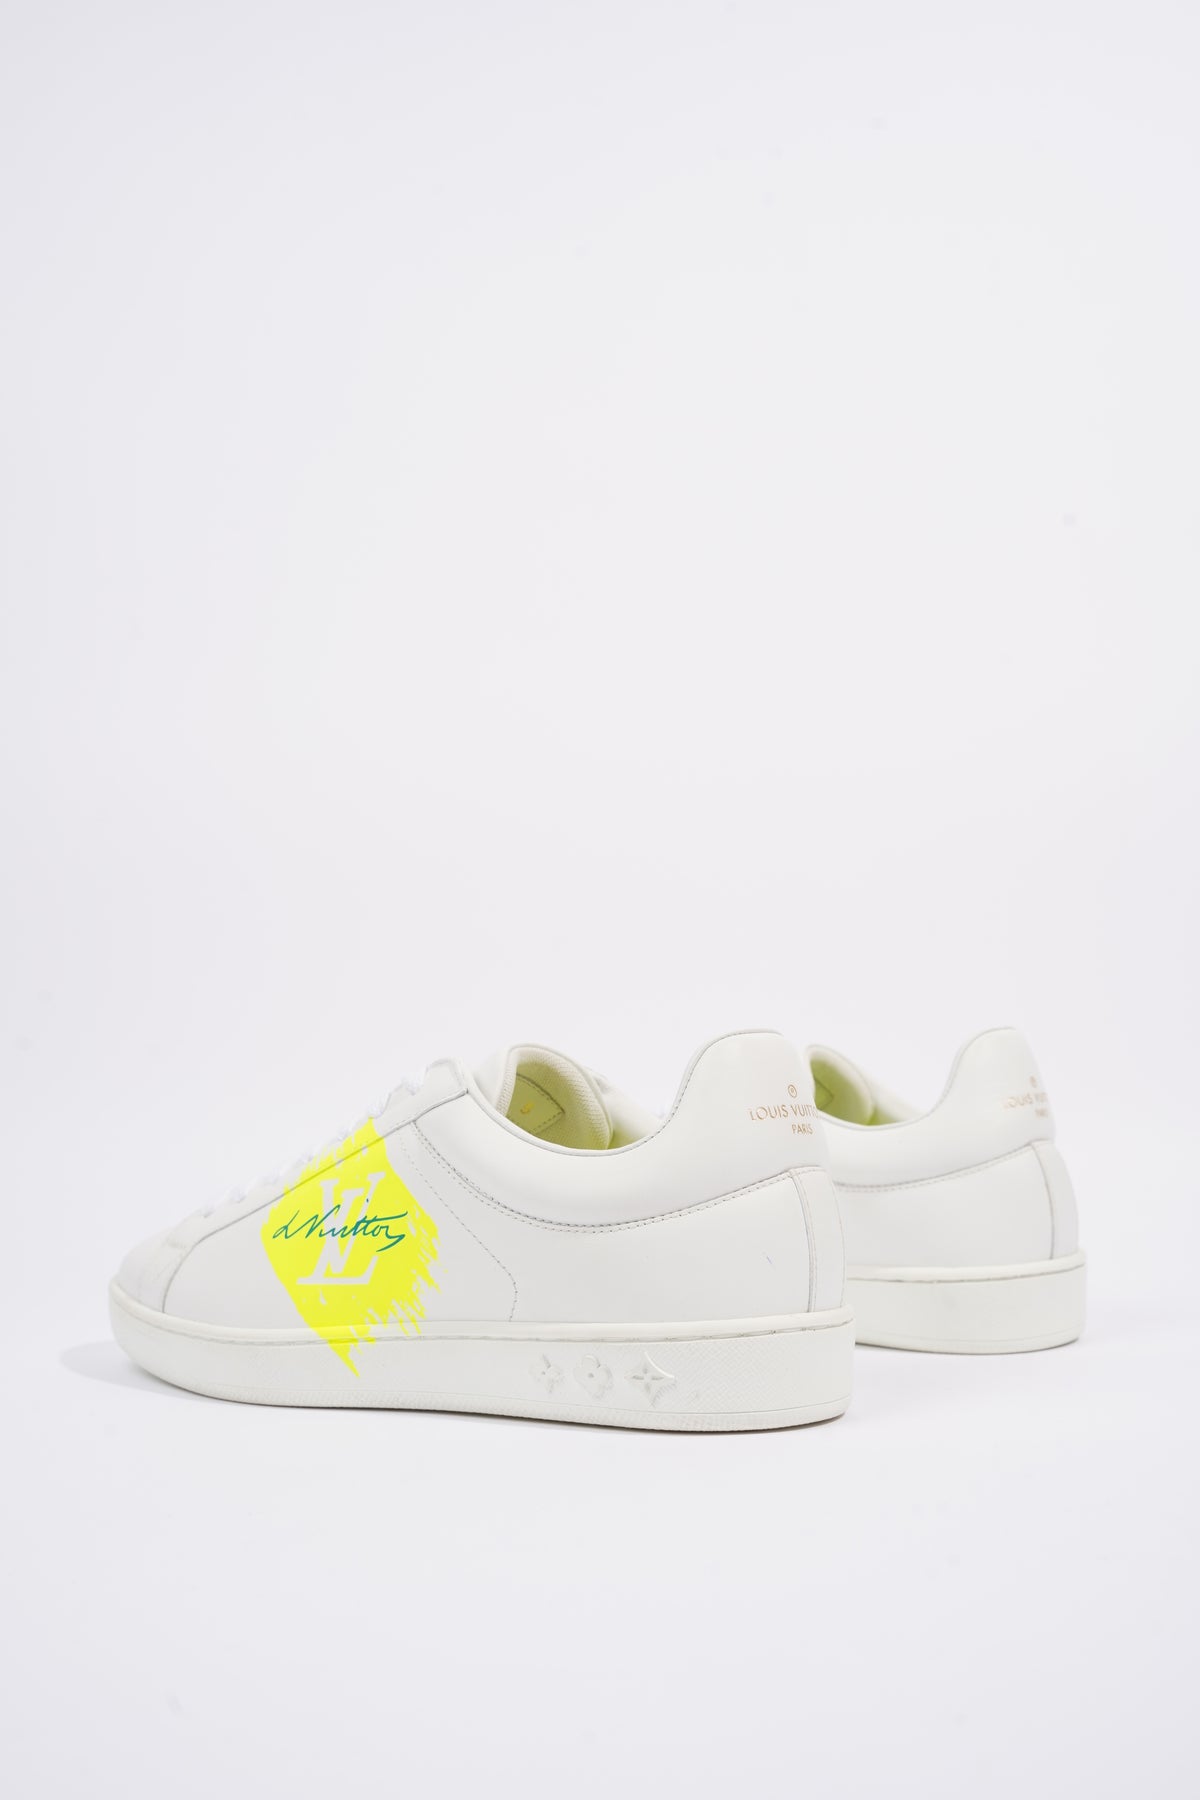 LV Trainer Sneakers (US 8) (LV 6) - Virgil Abloh Off White Canary Yellow